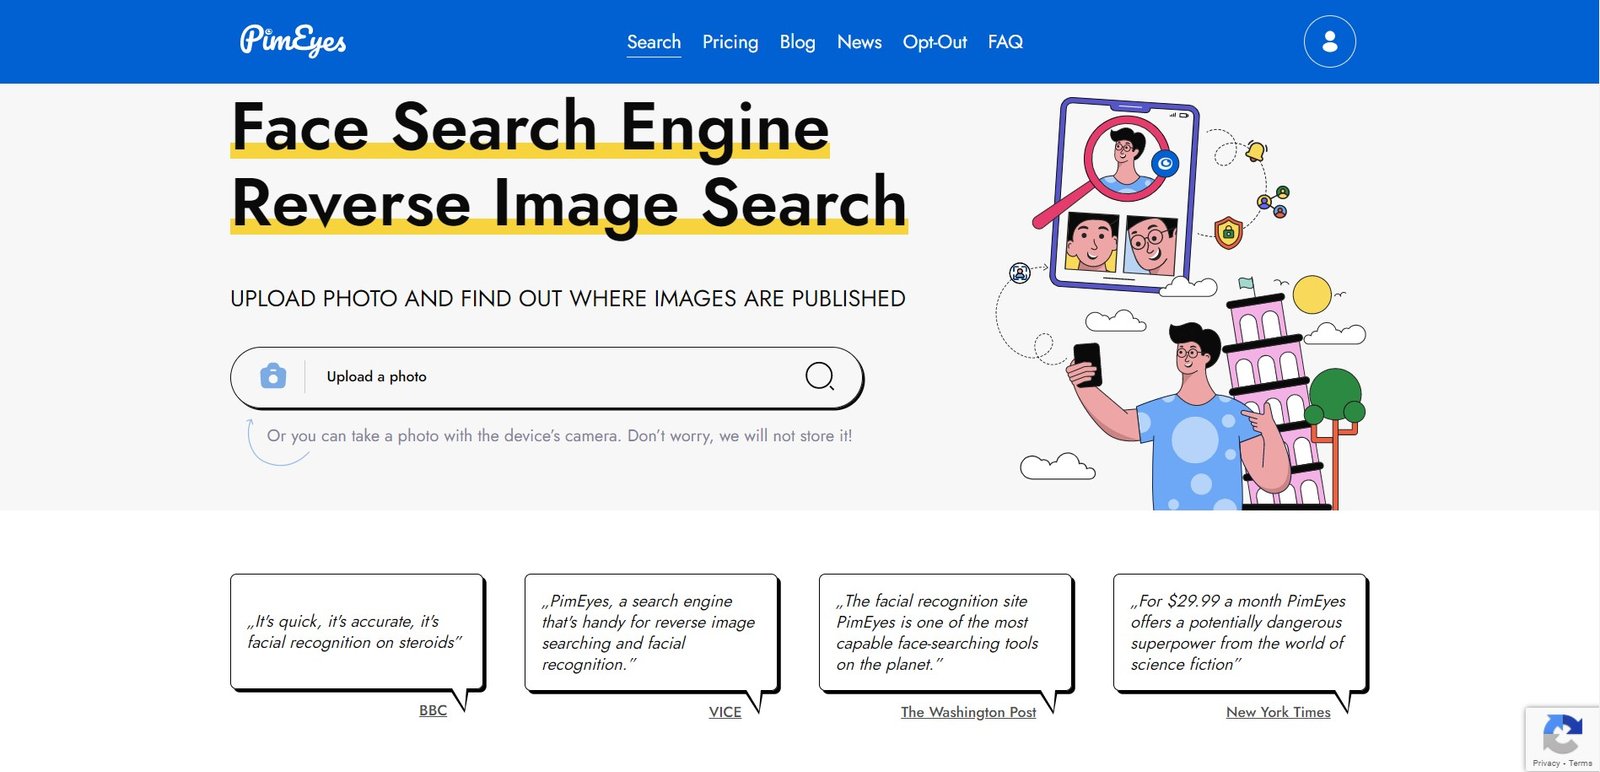 PimEyes is an online face search engine that utilizes advanced facial recognition technology to perform reverse image searches